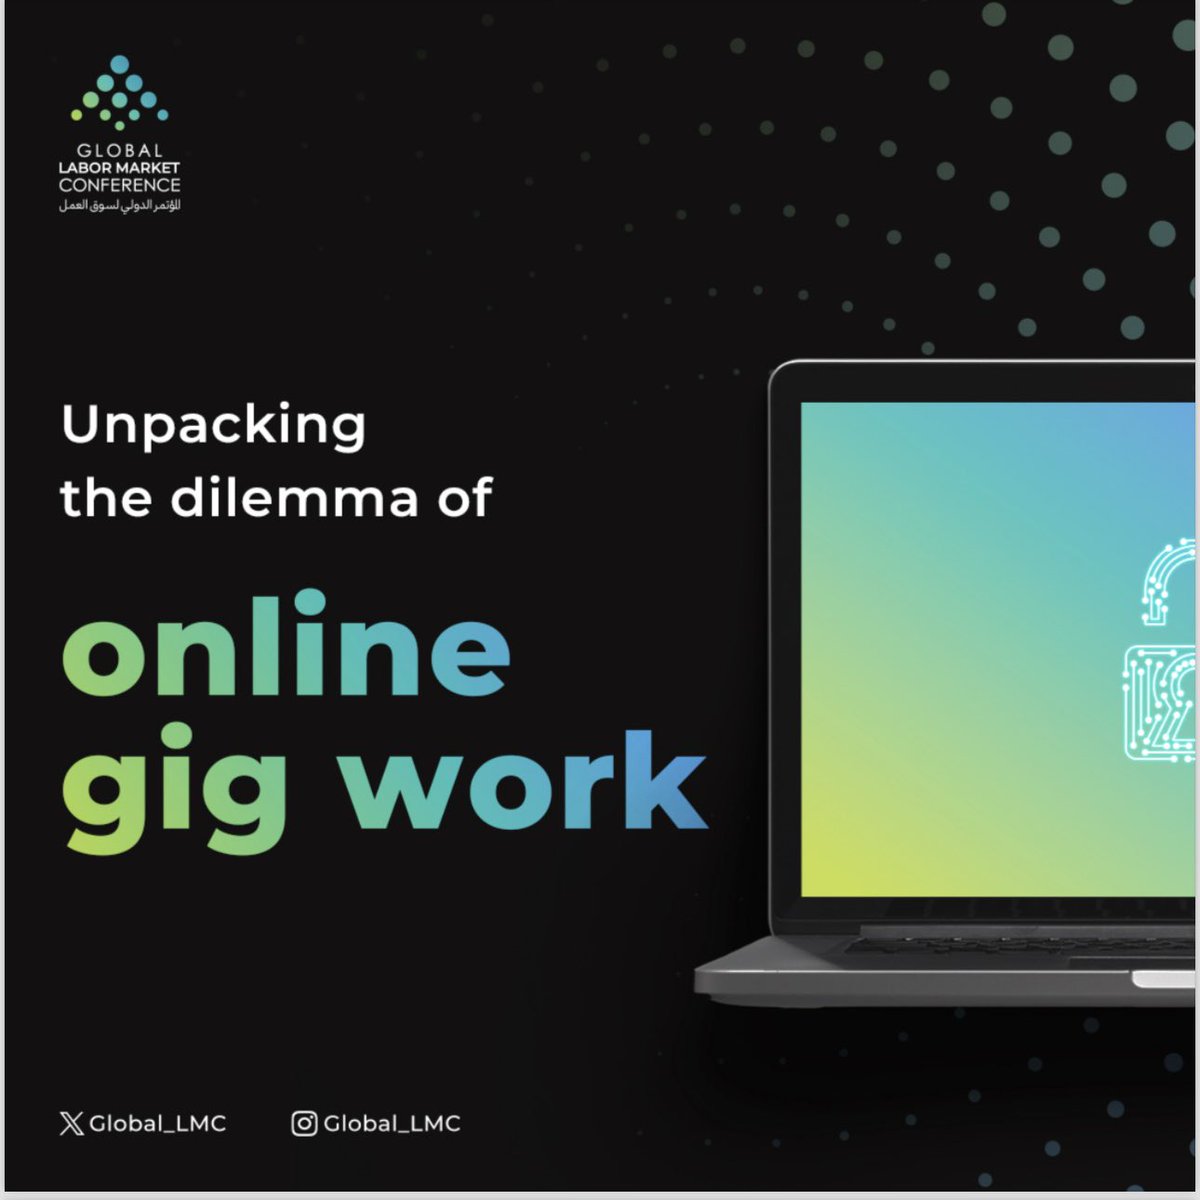 Despite its potential to bridge the digital divide, offer flexible work for overlooked groups, and more, online gig work is struggling with establishing sustainable business models. 
Explore the @World Bank’s deep dive here: bit.ly/3UFg5xR 
#GLMC #GLMCinsights